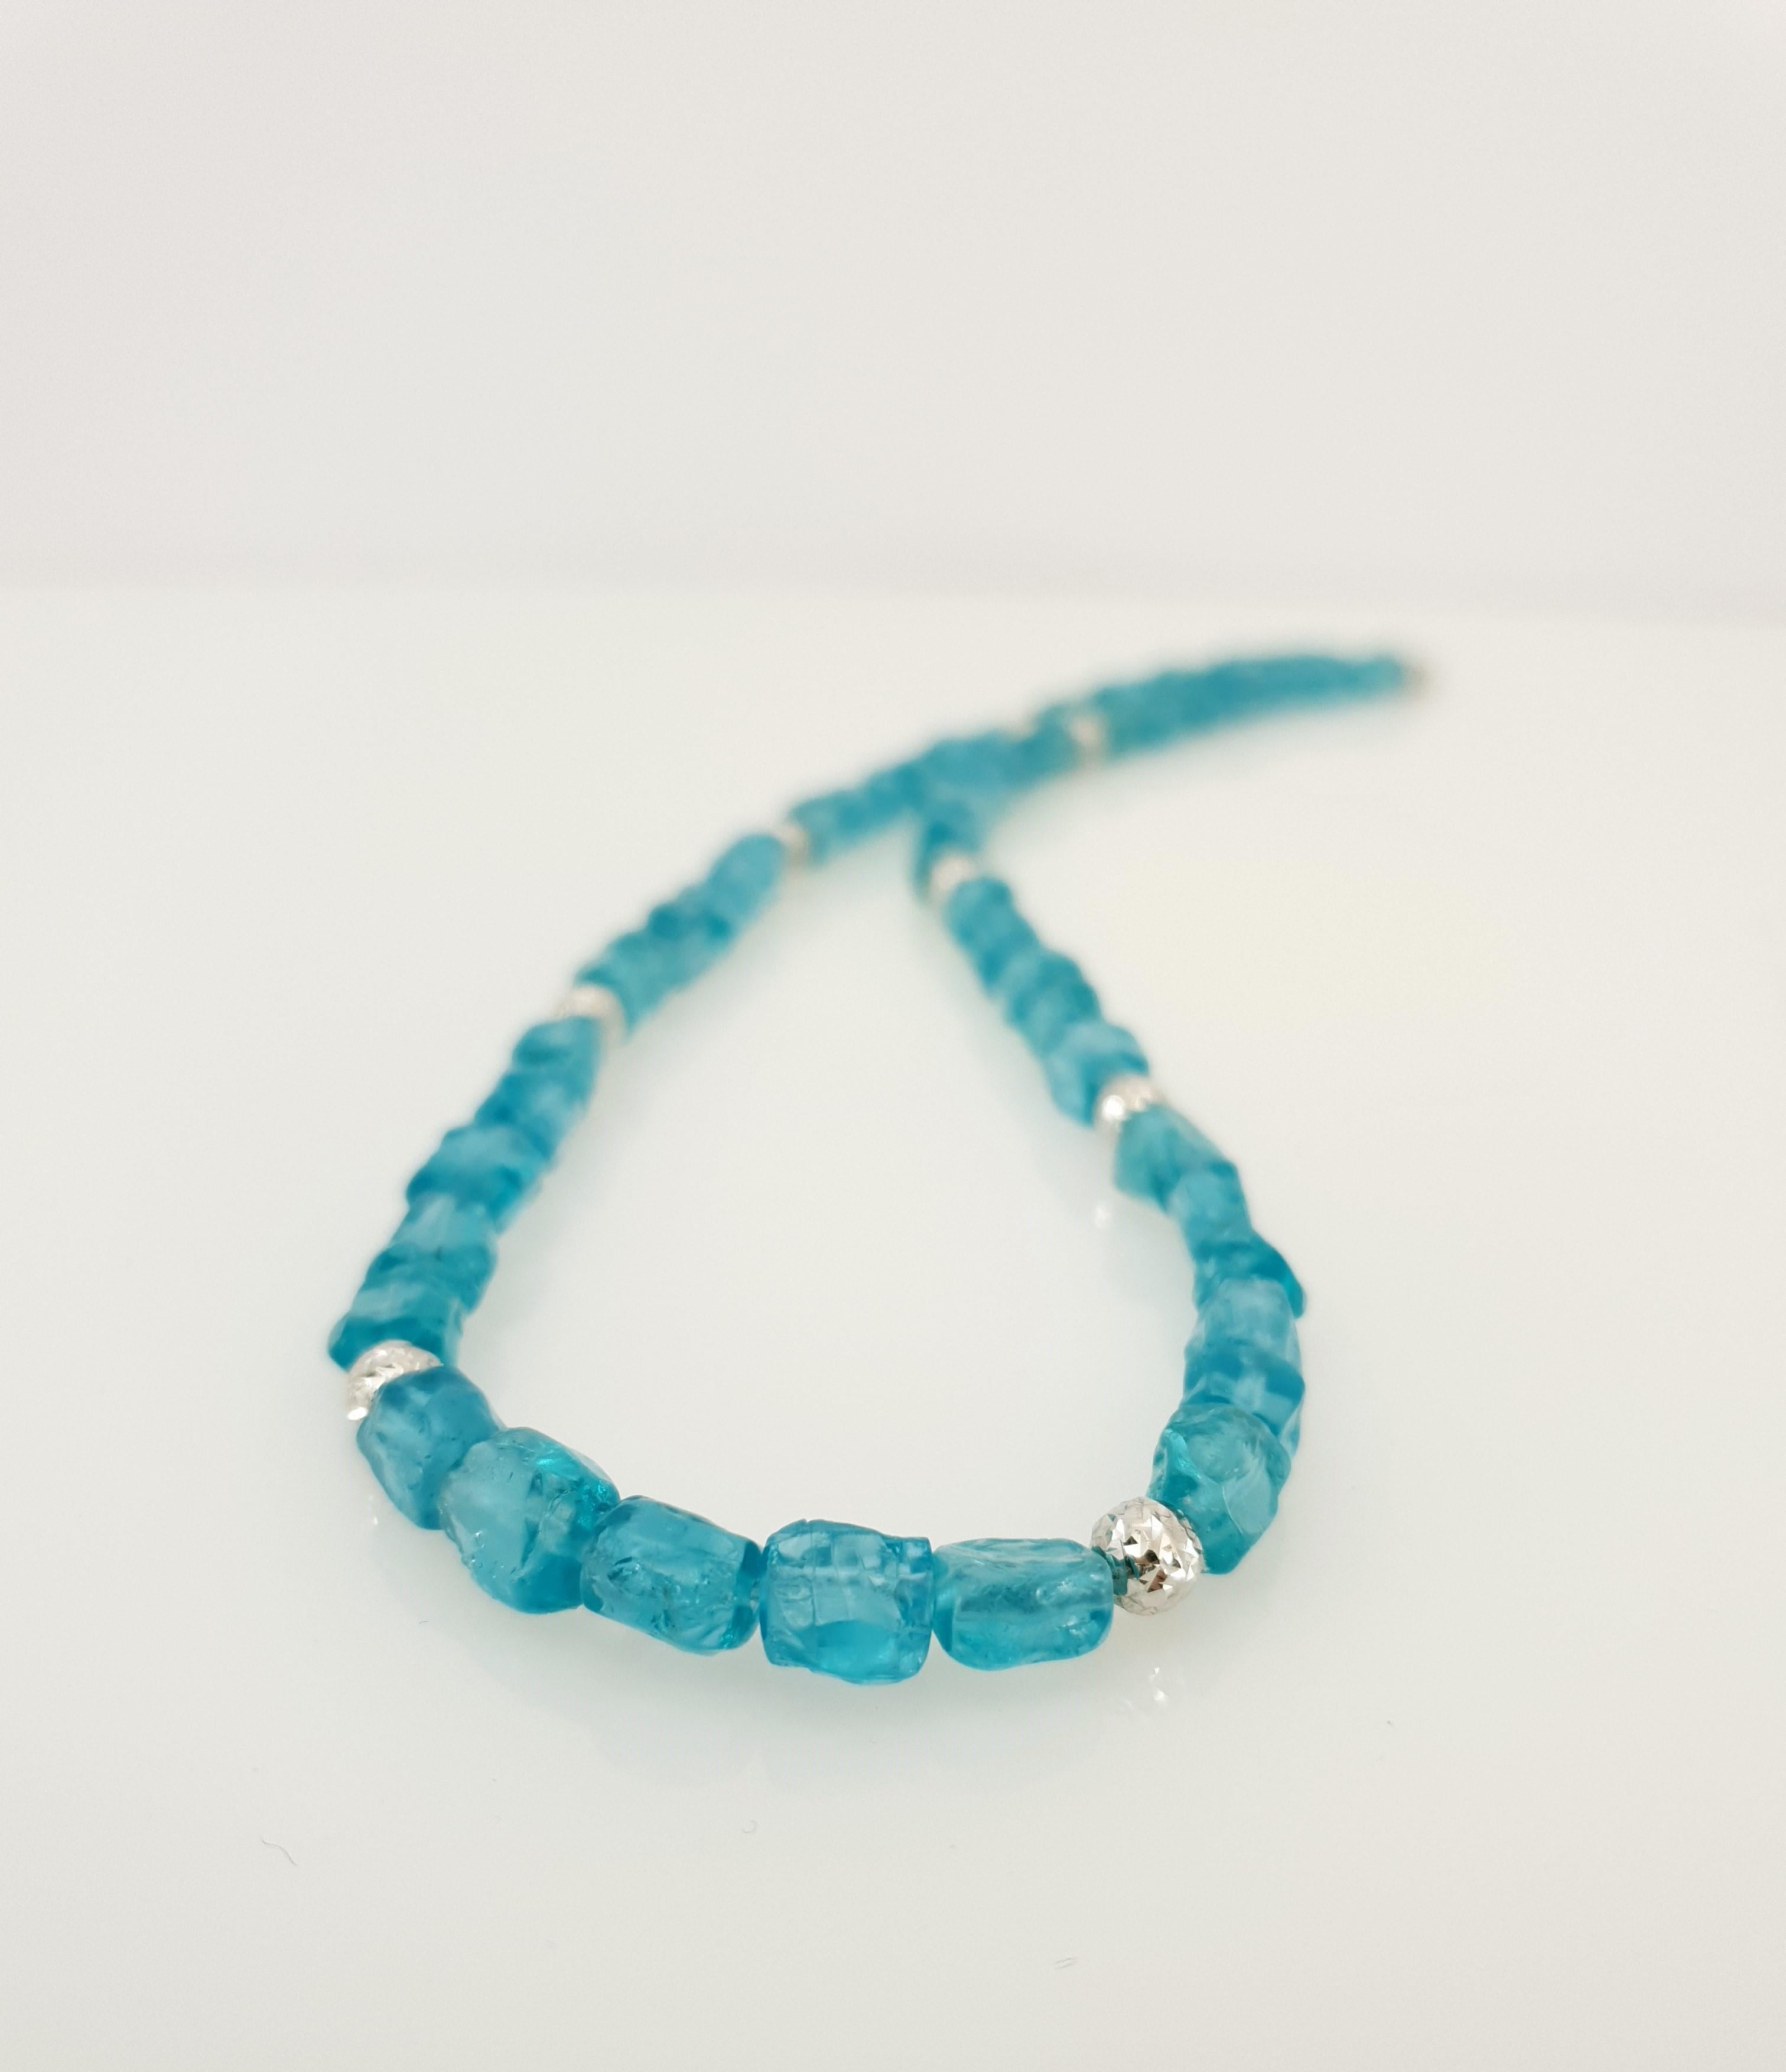 Paraiba Blue Apatite Nugget Beaded Necklace with 18 Carat White Gold 1